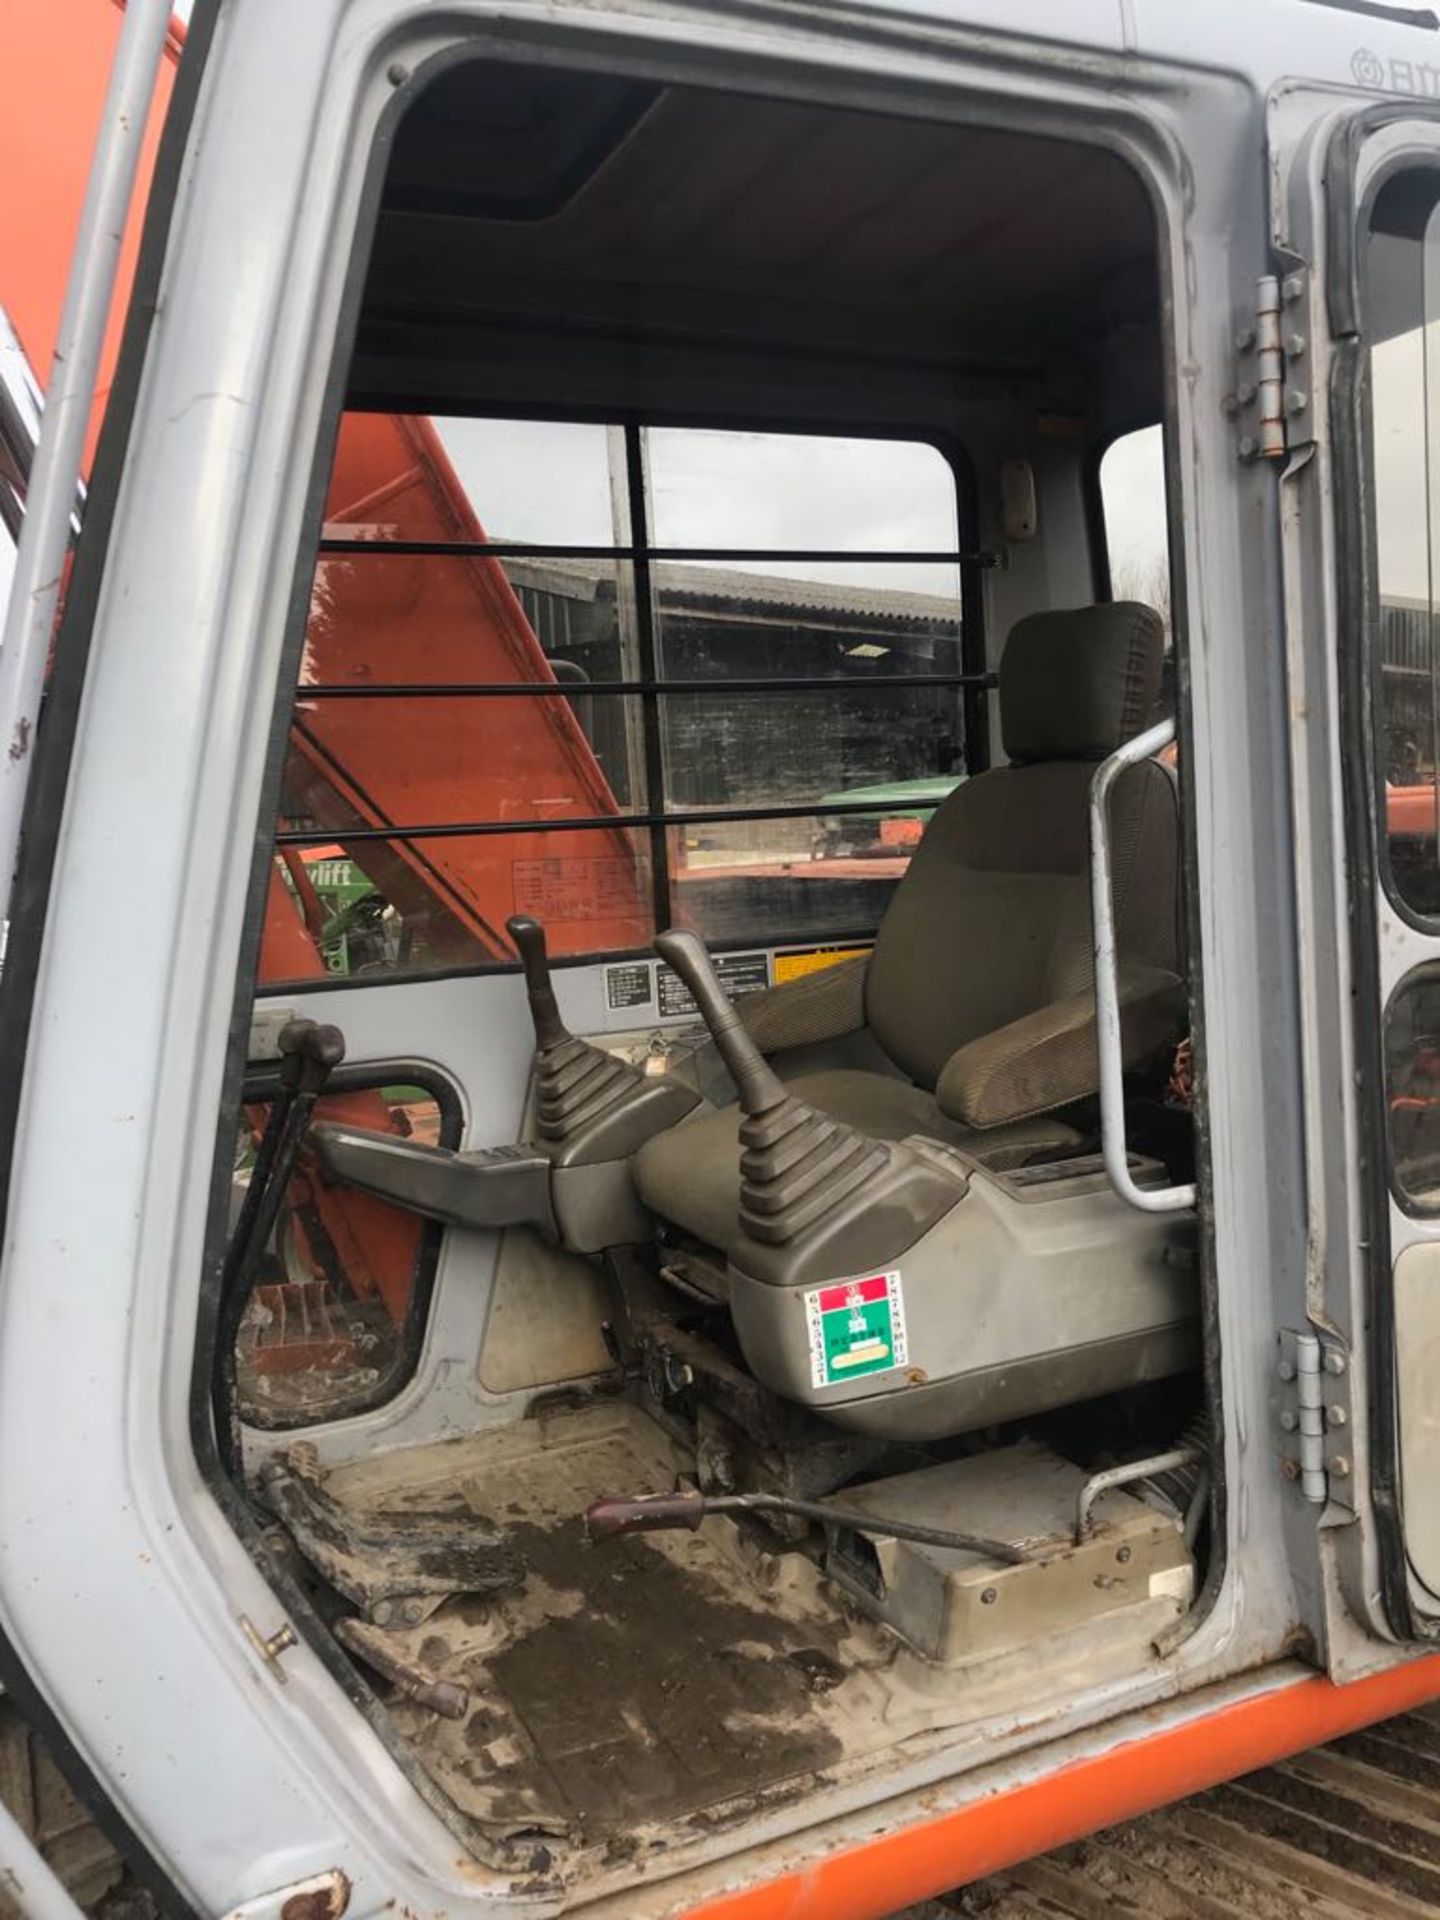 10 TONNE HITACHI DIGGER / EXCAVATOR, ALL GOOD AND WORKING, CLEAN & TIDY, SHOWING 6,021 HOURS - Image 6 of 11